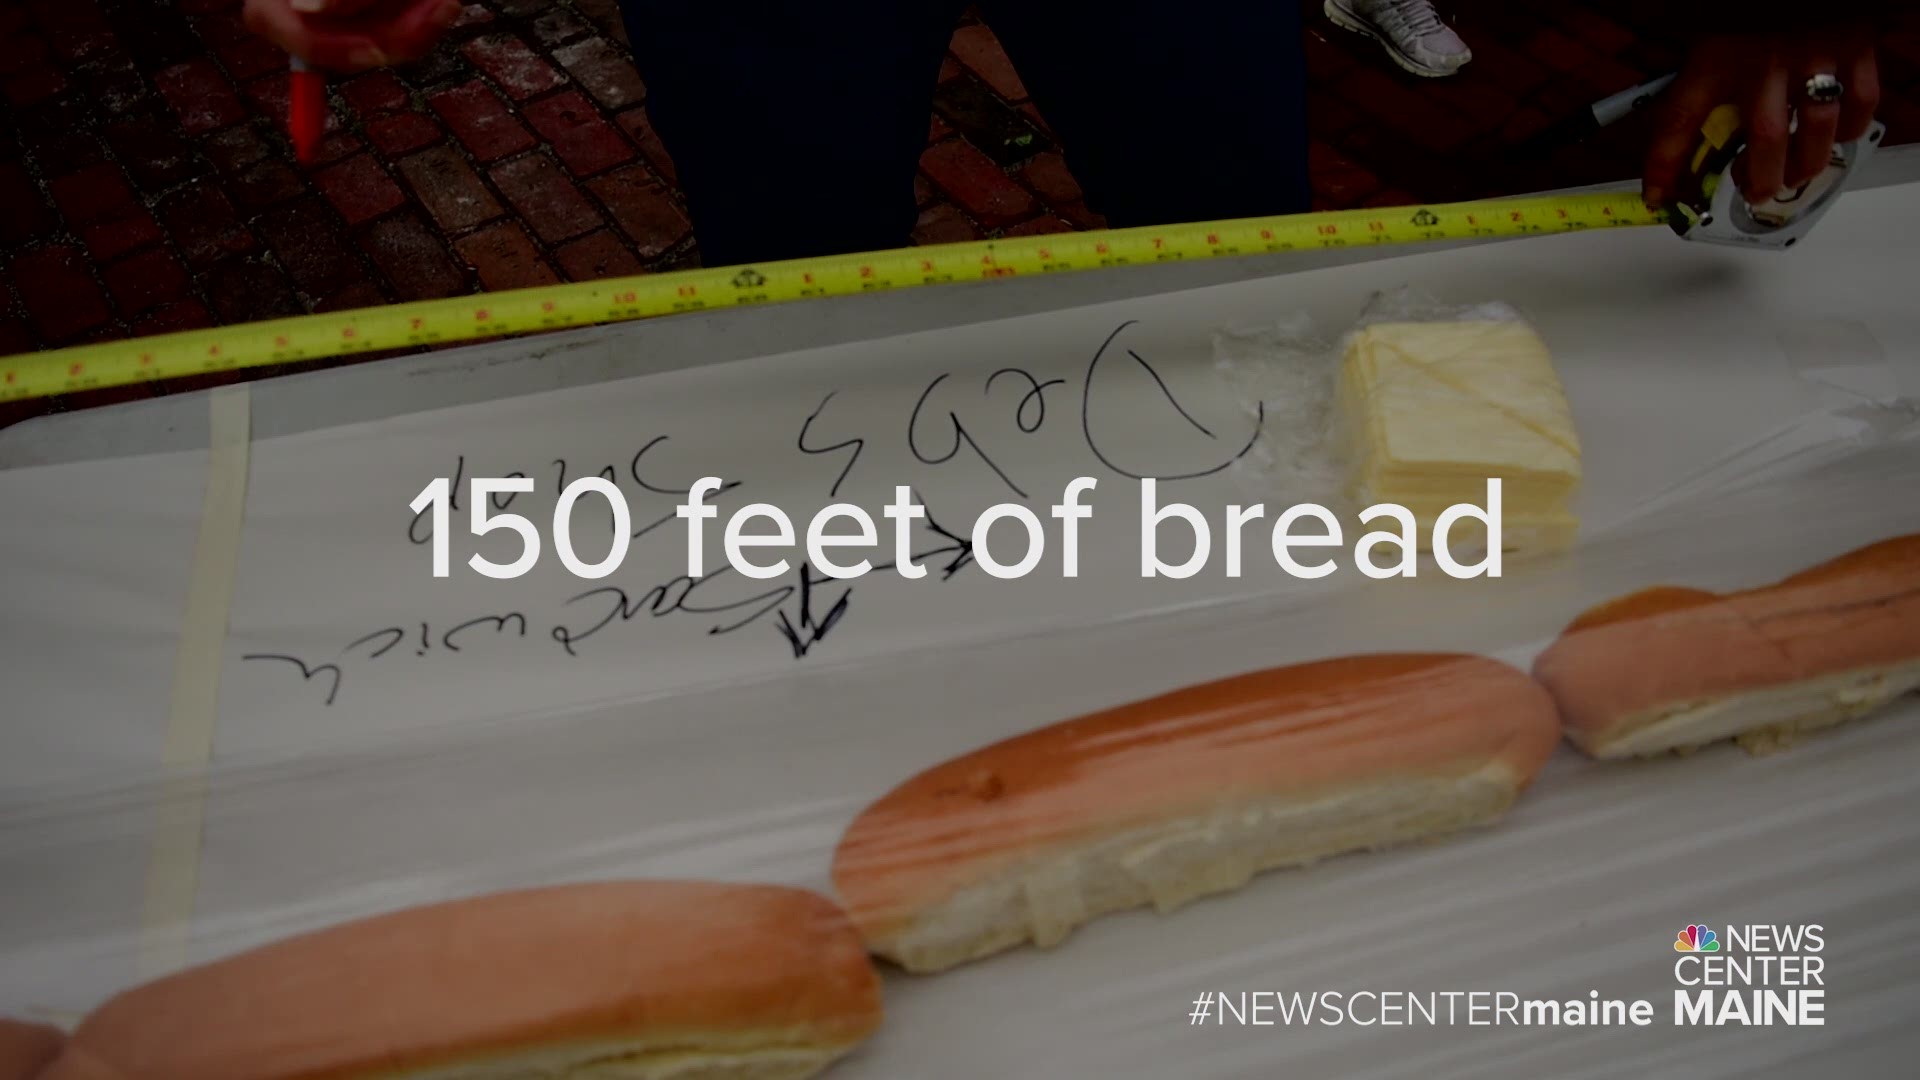 A staple in Maine cuisine is the focus of the latest world record attempt